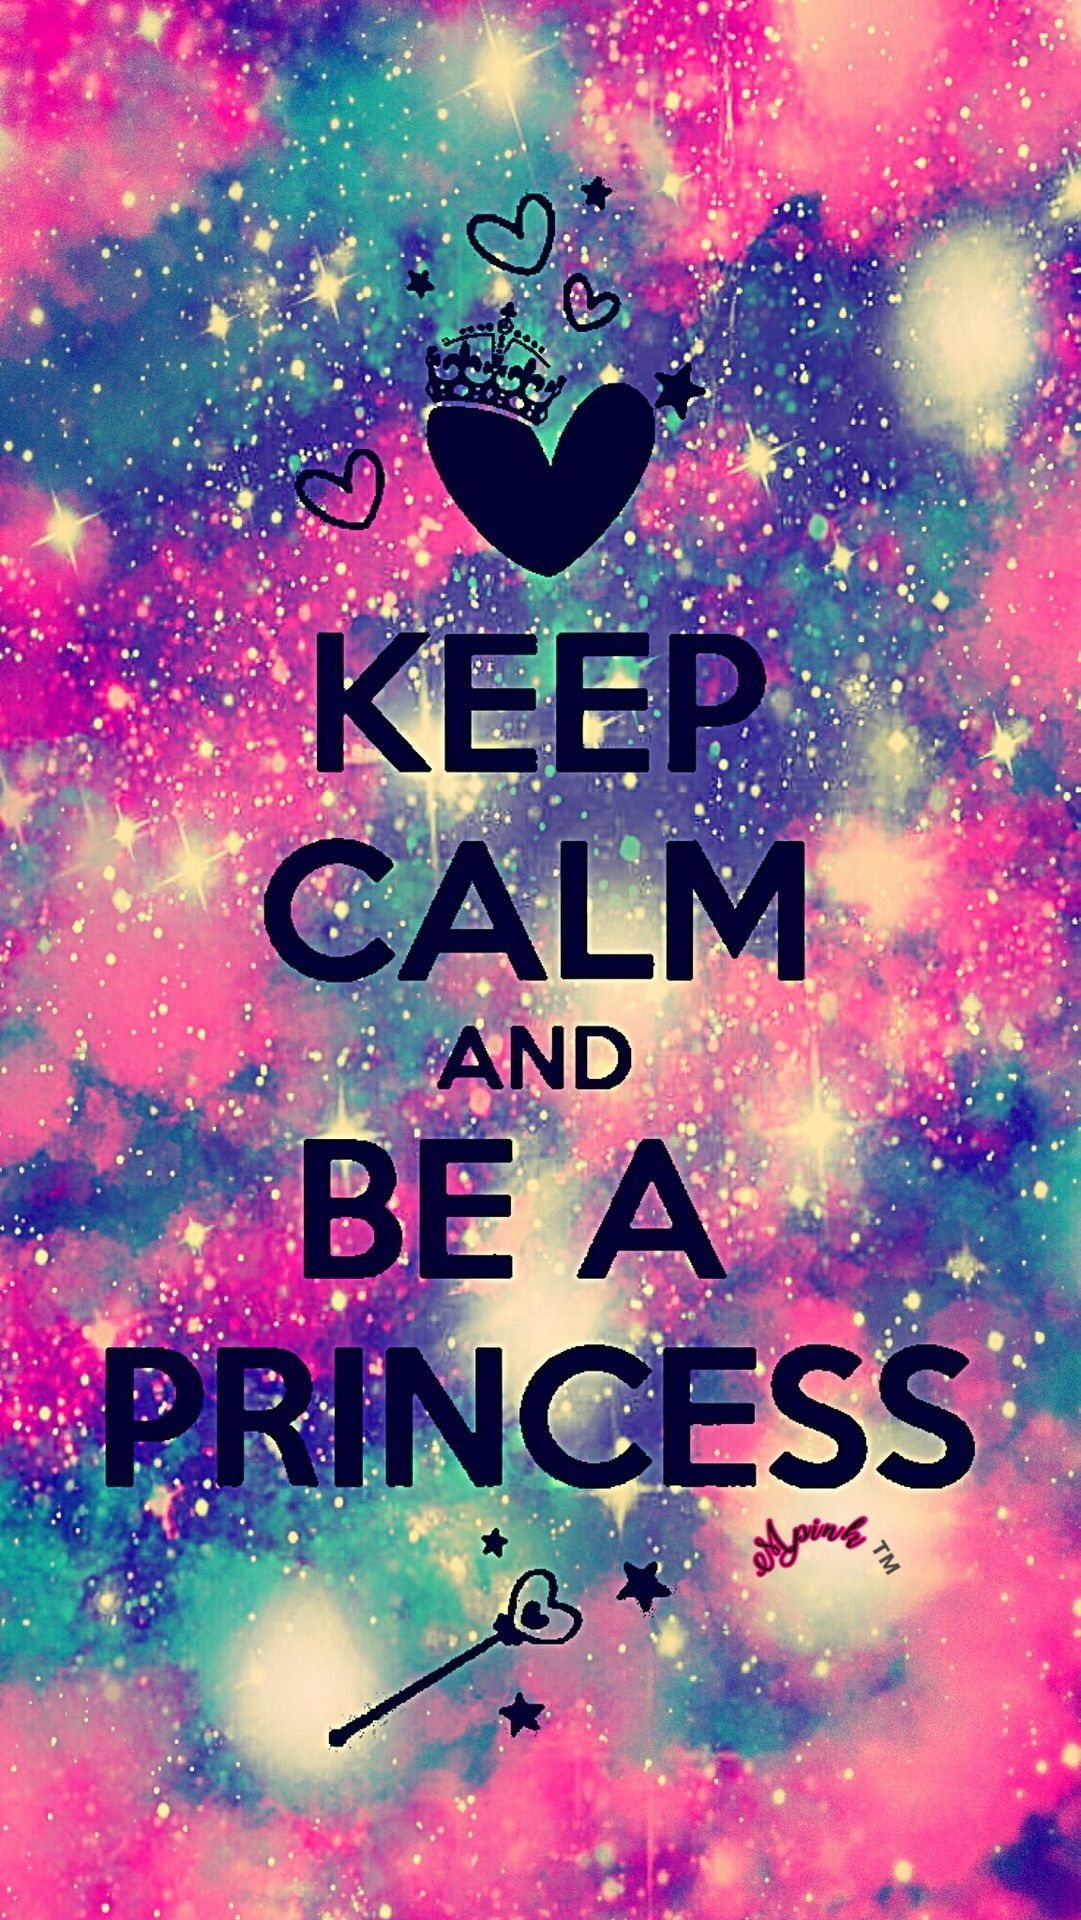 Res: 1081x Sparkle Quotes, Princess Star, Galaxy Wallpaper, Star Quotes, Sparkles Glitter, Disney Lesson. Sparkle quotes, Keep calm wallpaper, Galaxy quotes